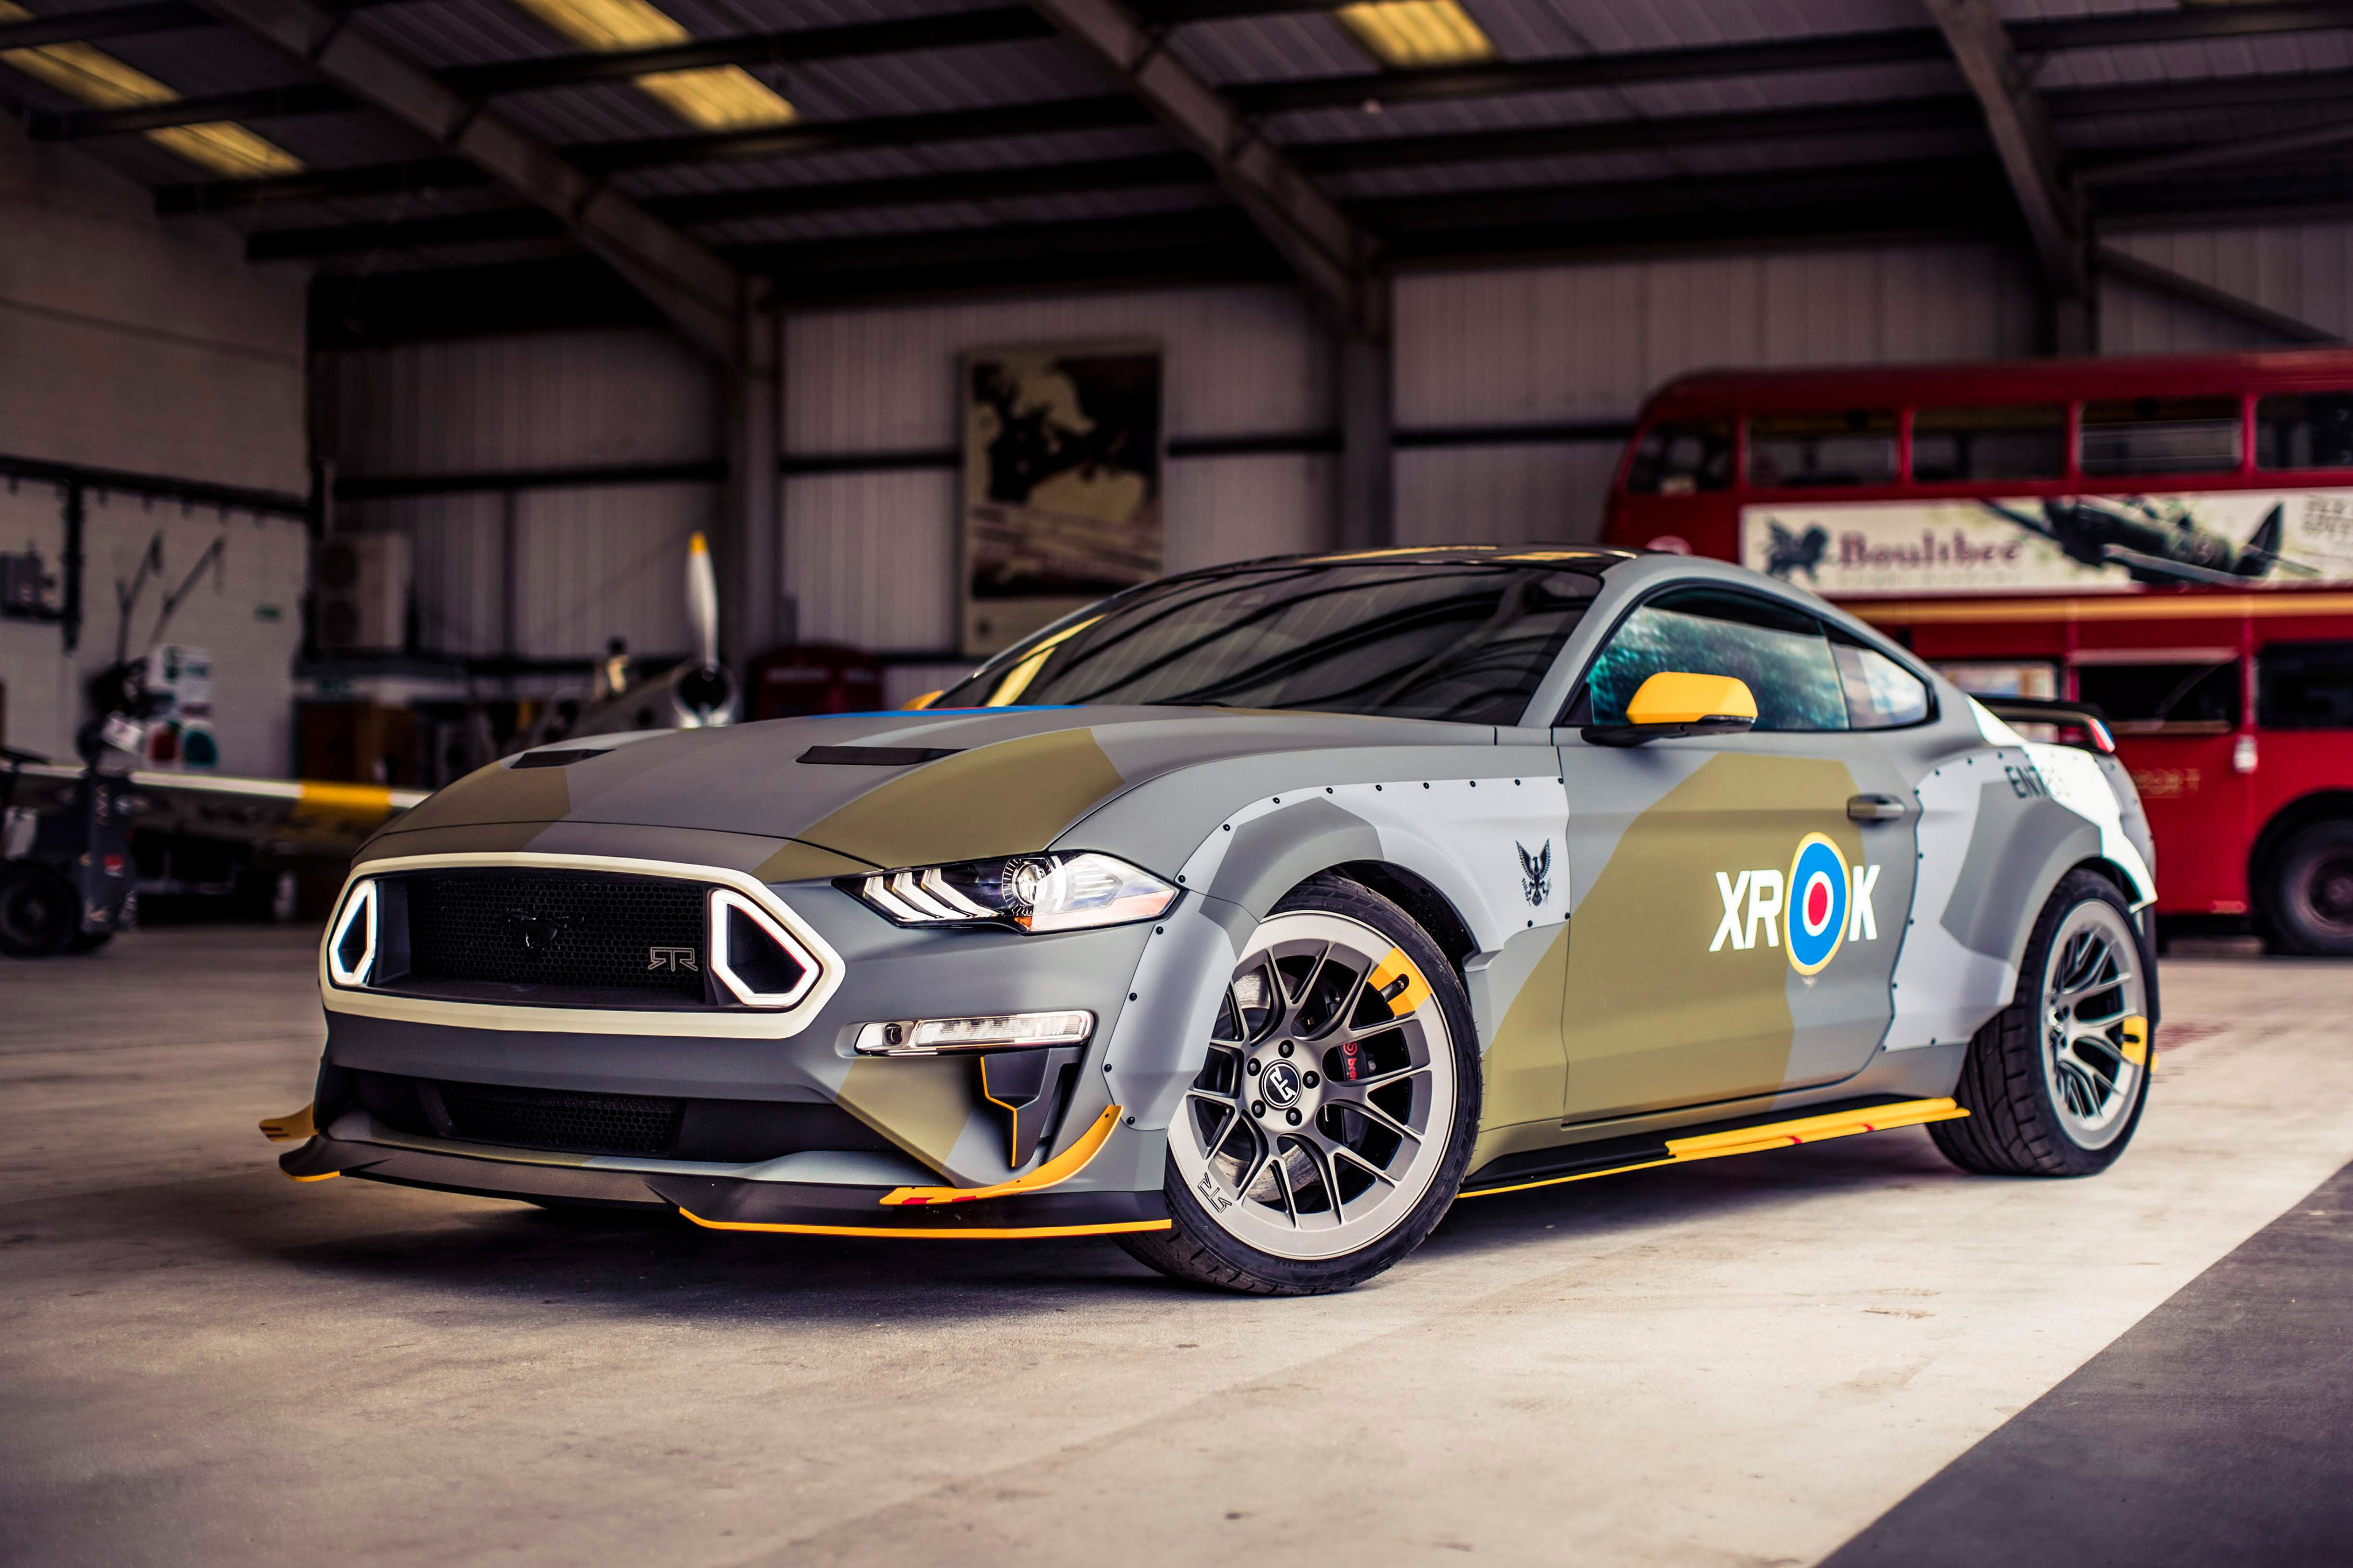 Ford Mustang Gt Eagle Squadron - HD Wallpaper 